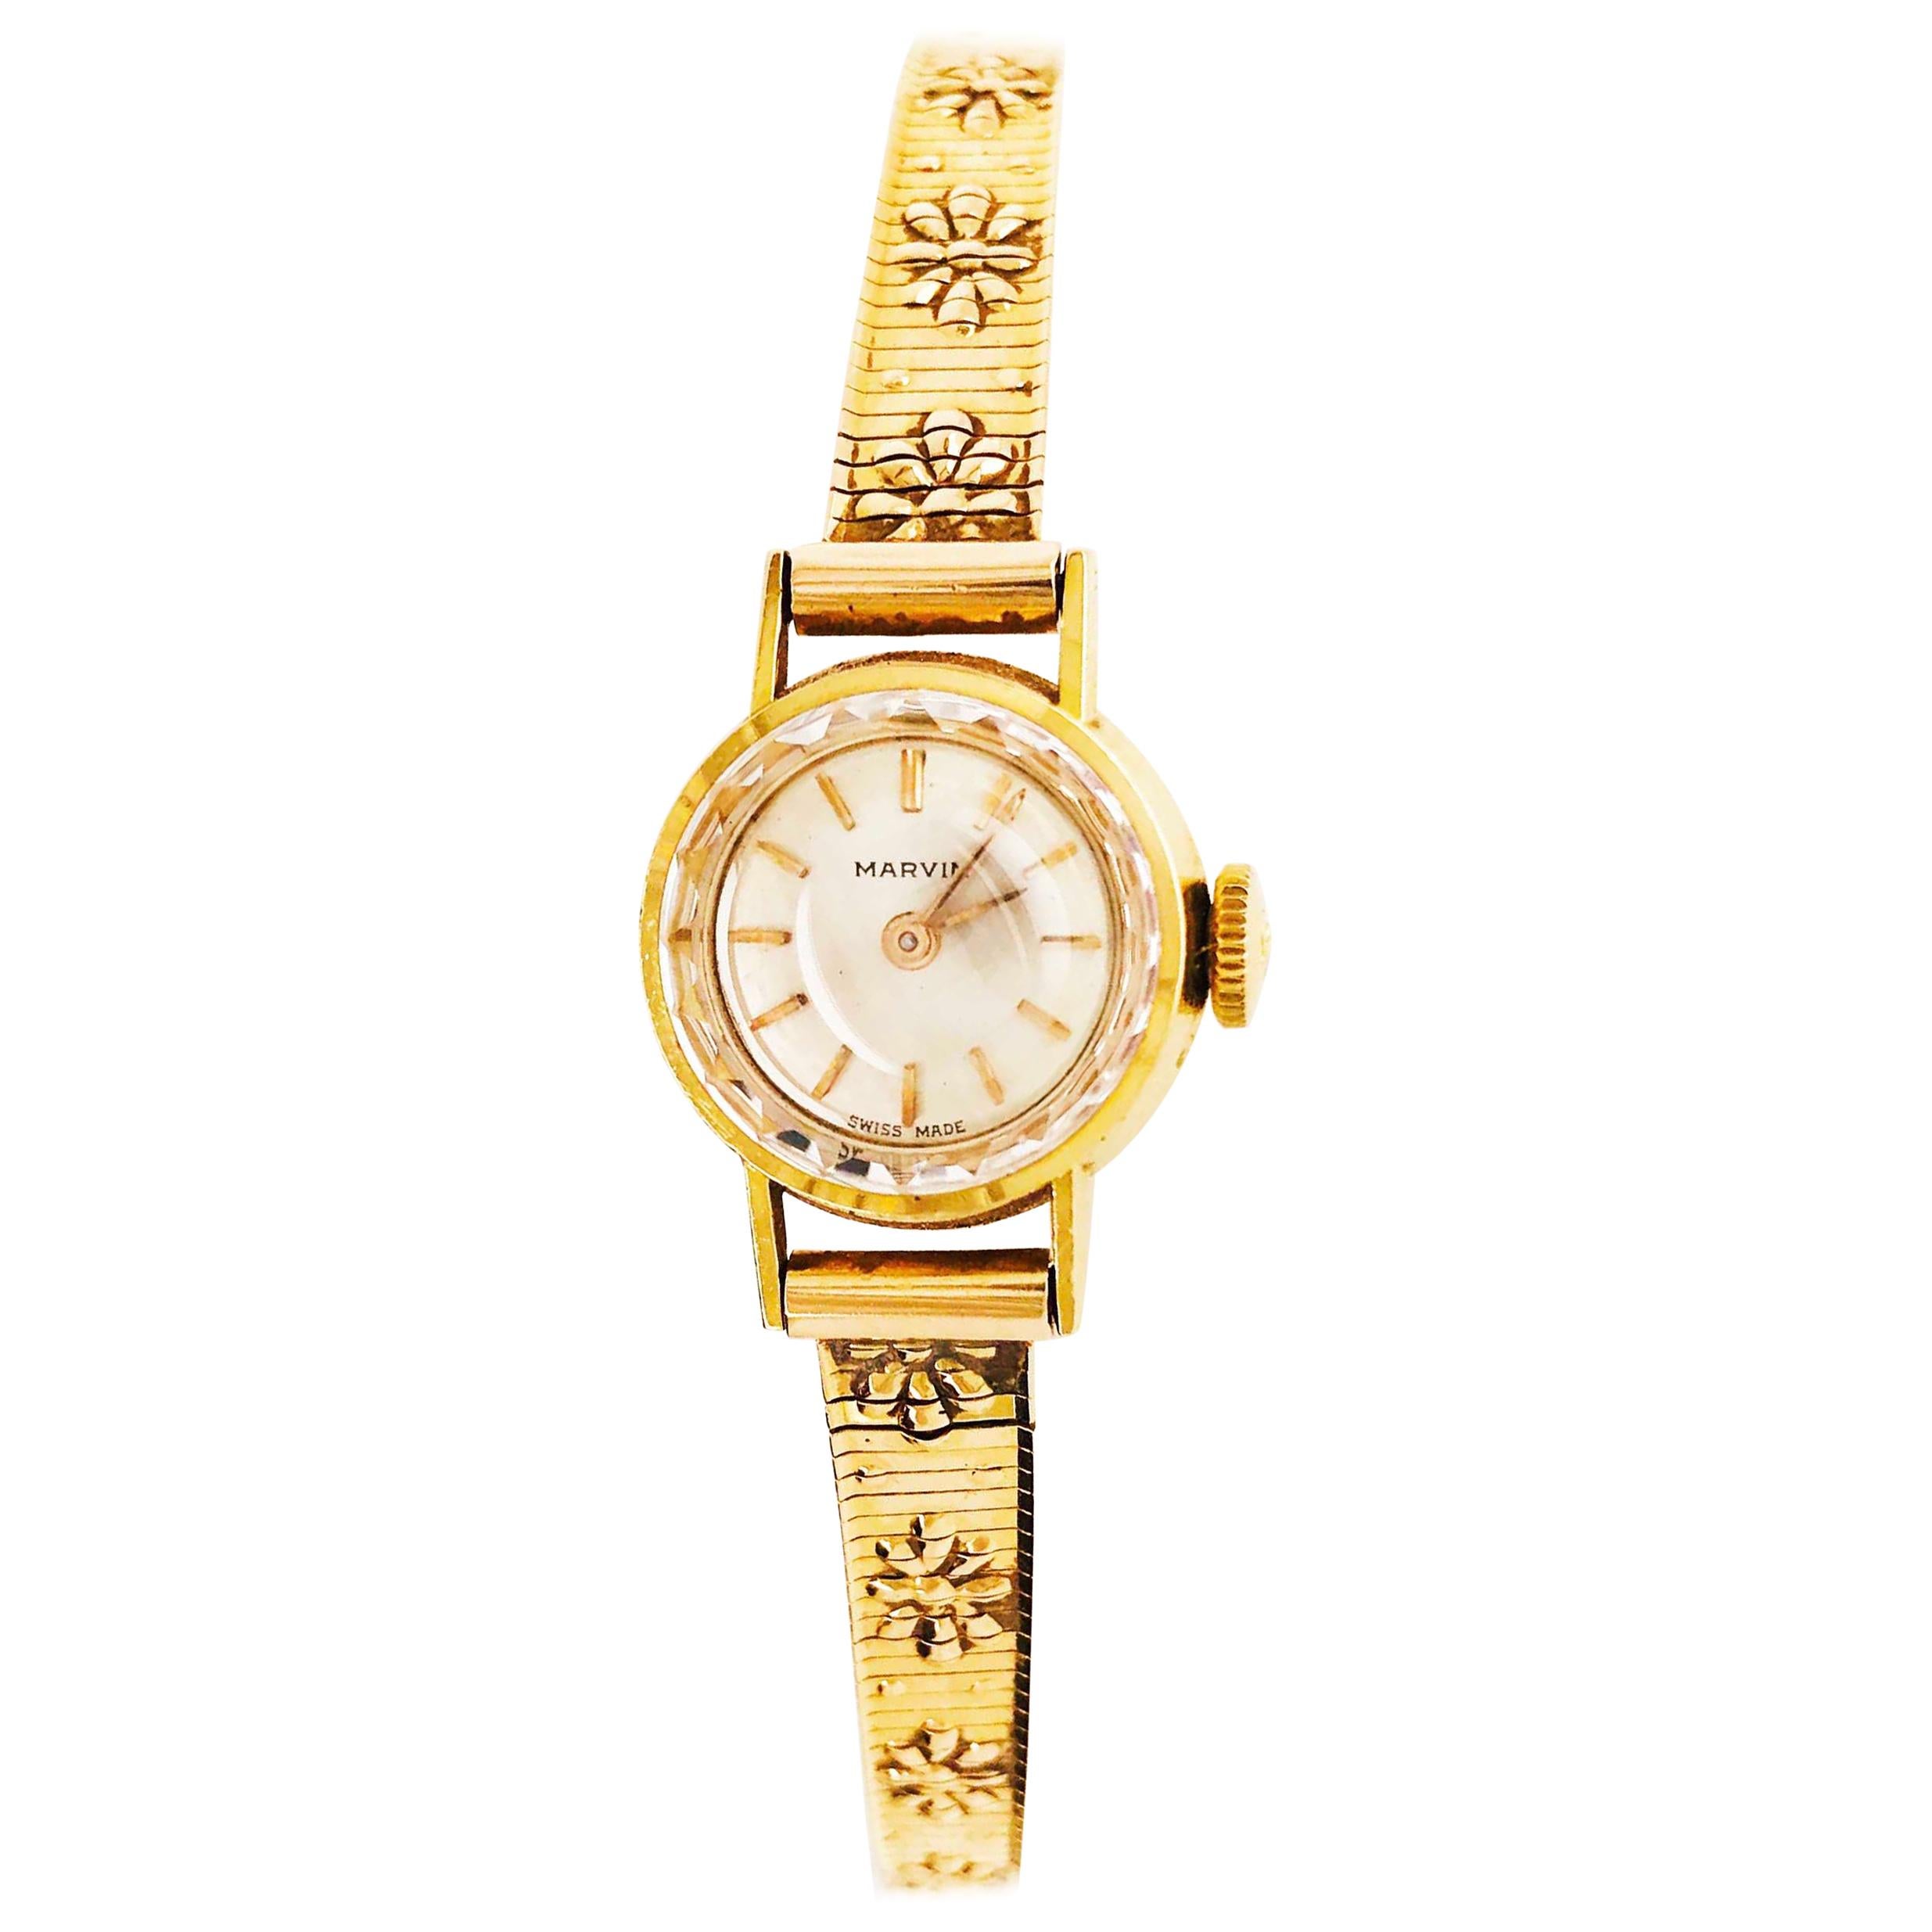 Ladies Gold Watch-Marvin Brand with 14 Karat Gold Case and Band, circa 1955